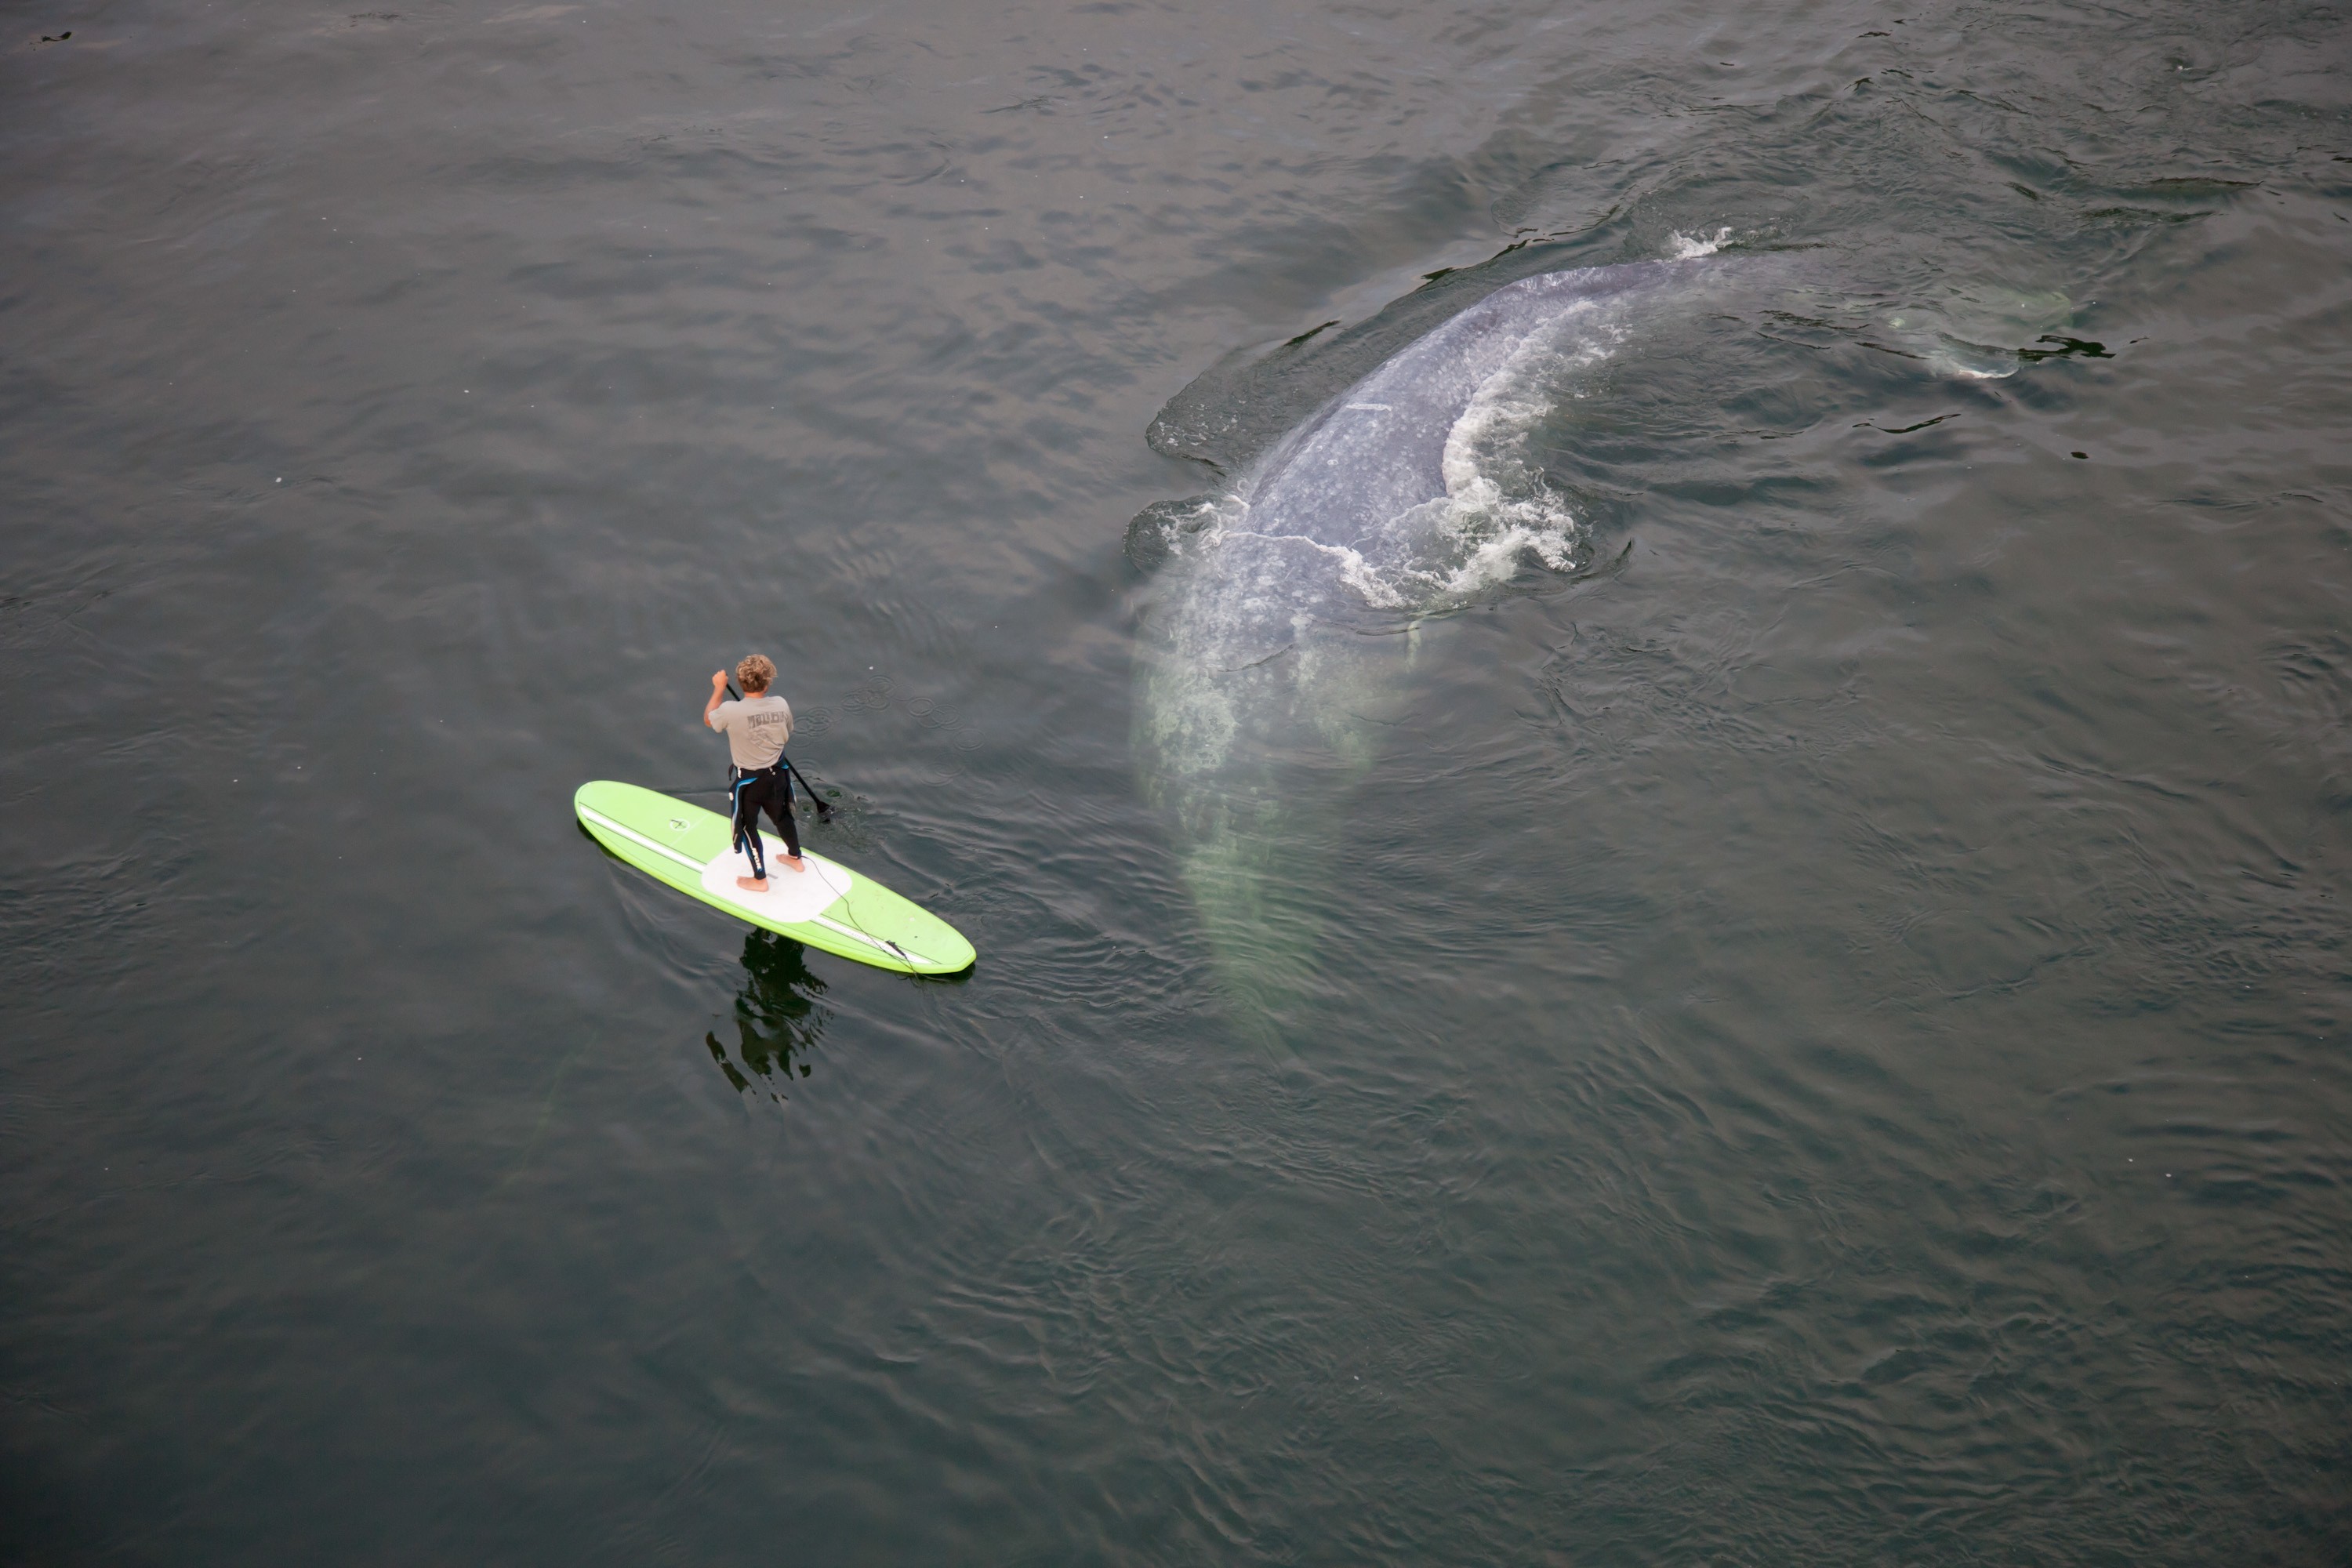 General 3000x2000 animals whale mammals nature outdoors paddleboard